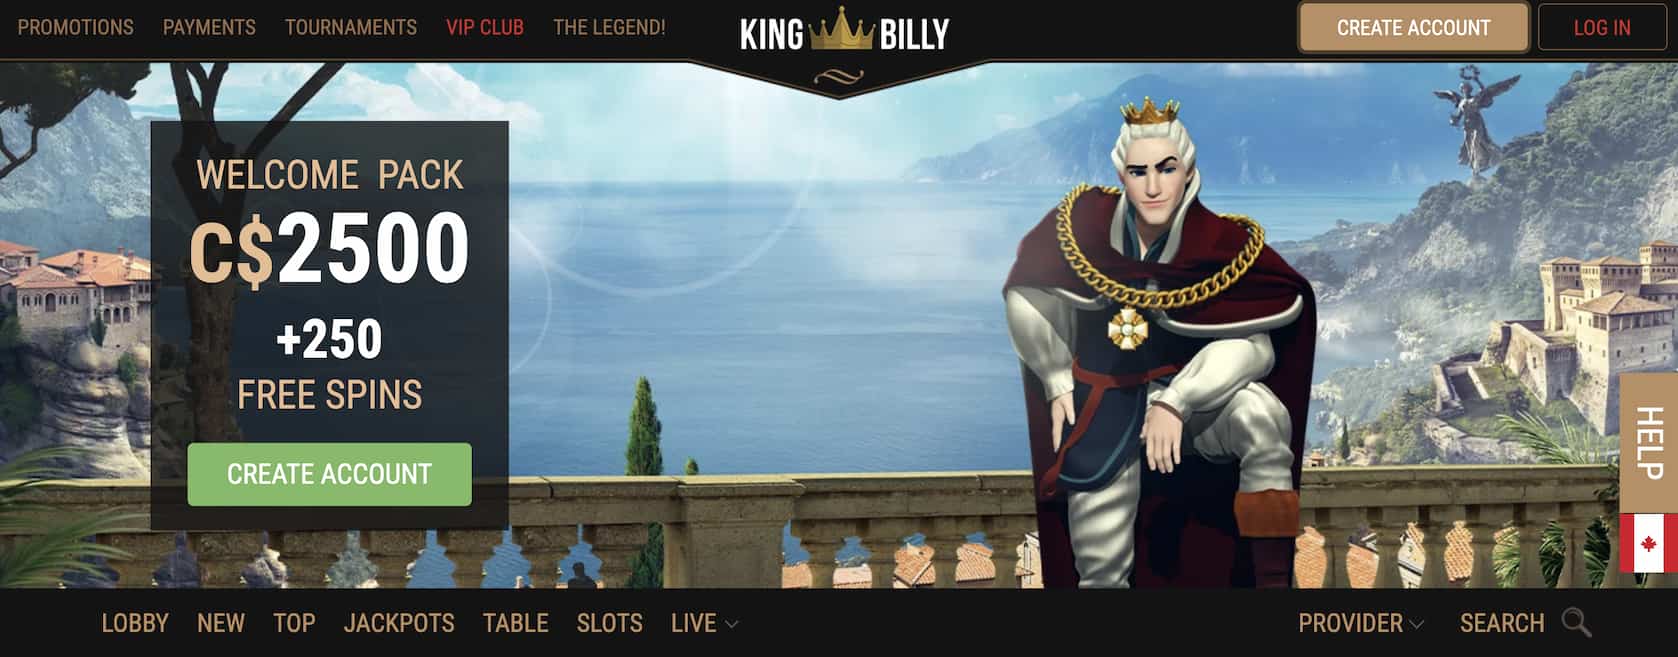 king billy casino review